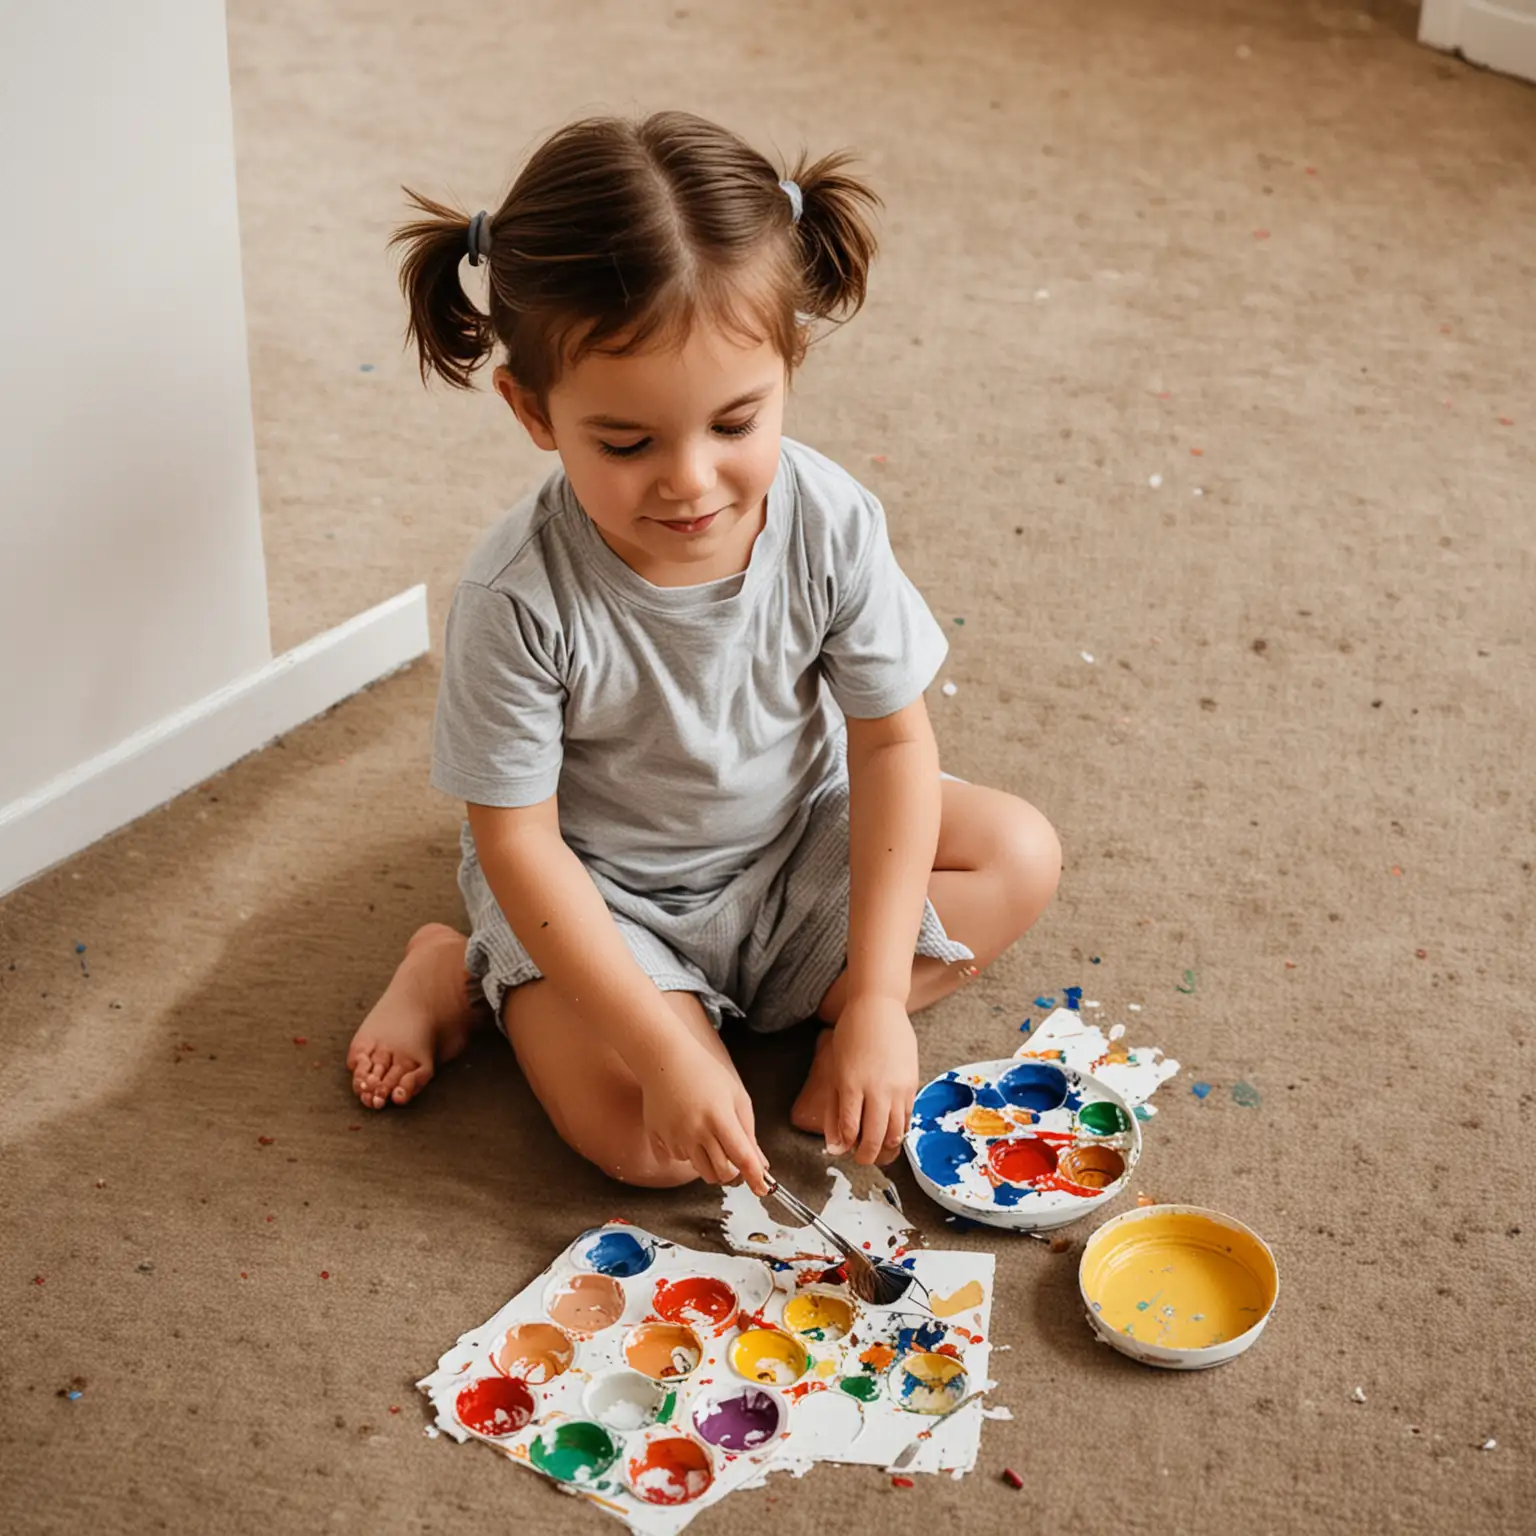 Creative Child Painting and Crafting on Floor